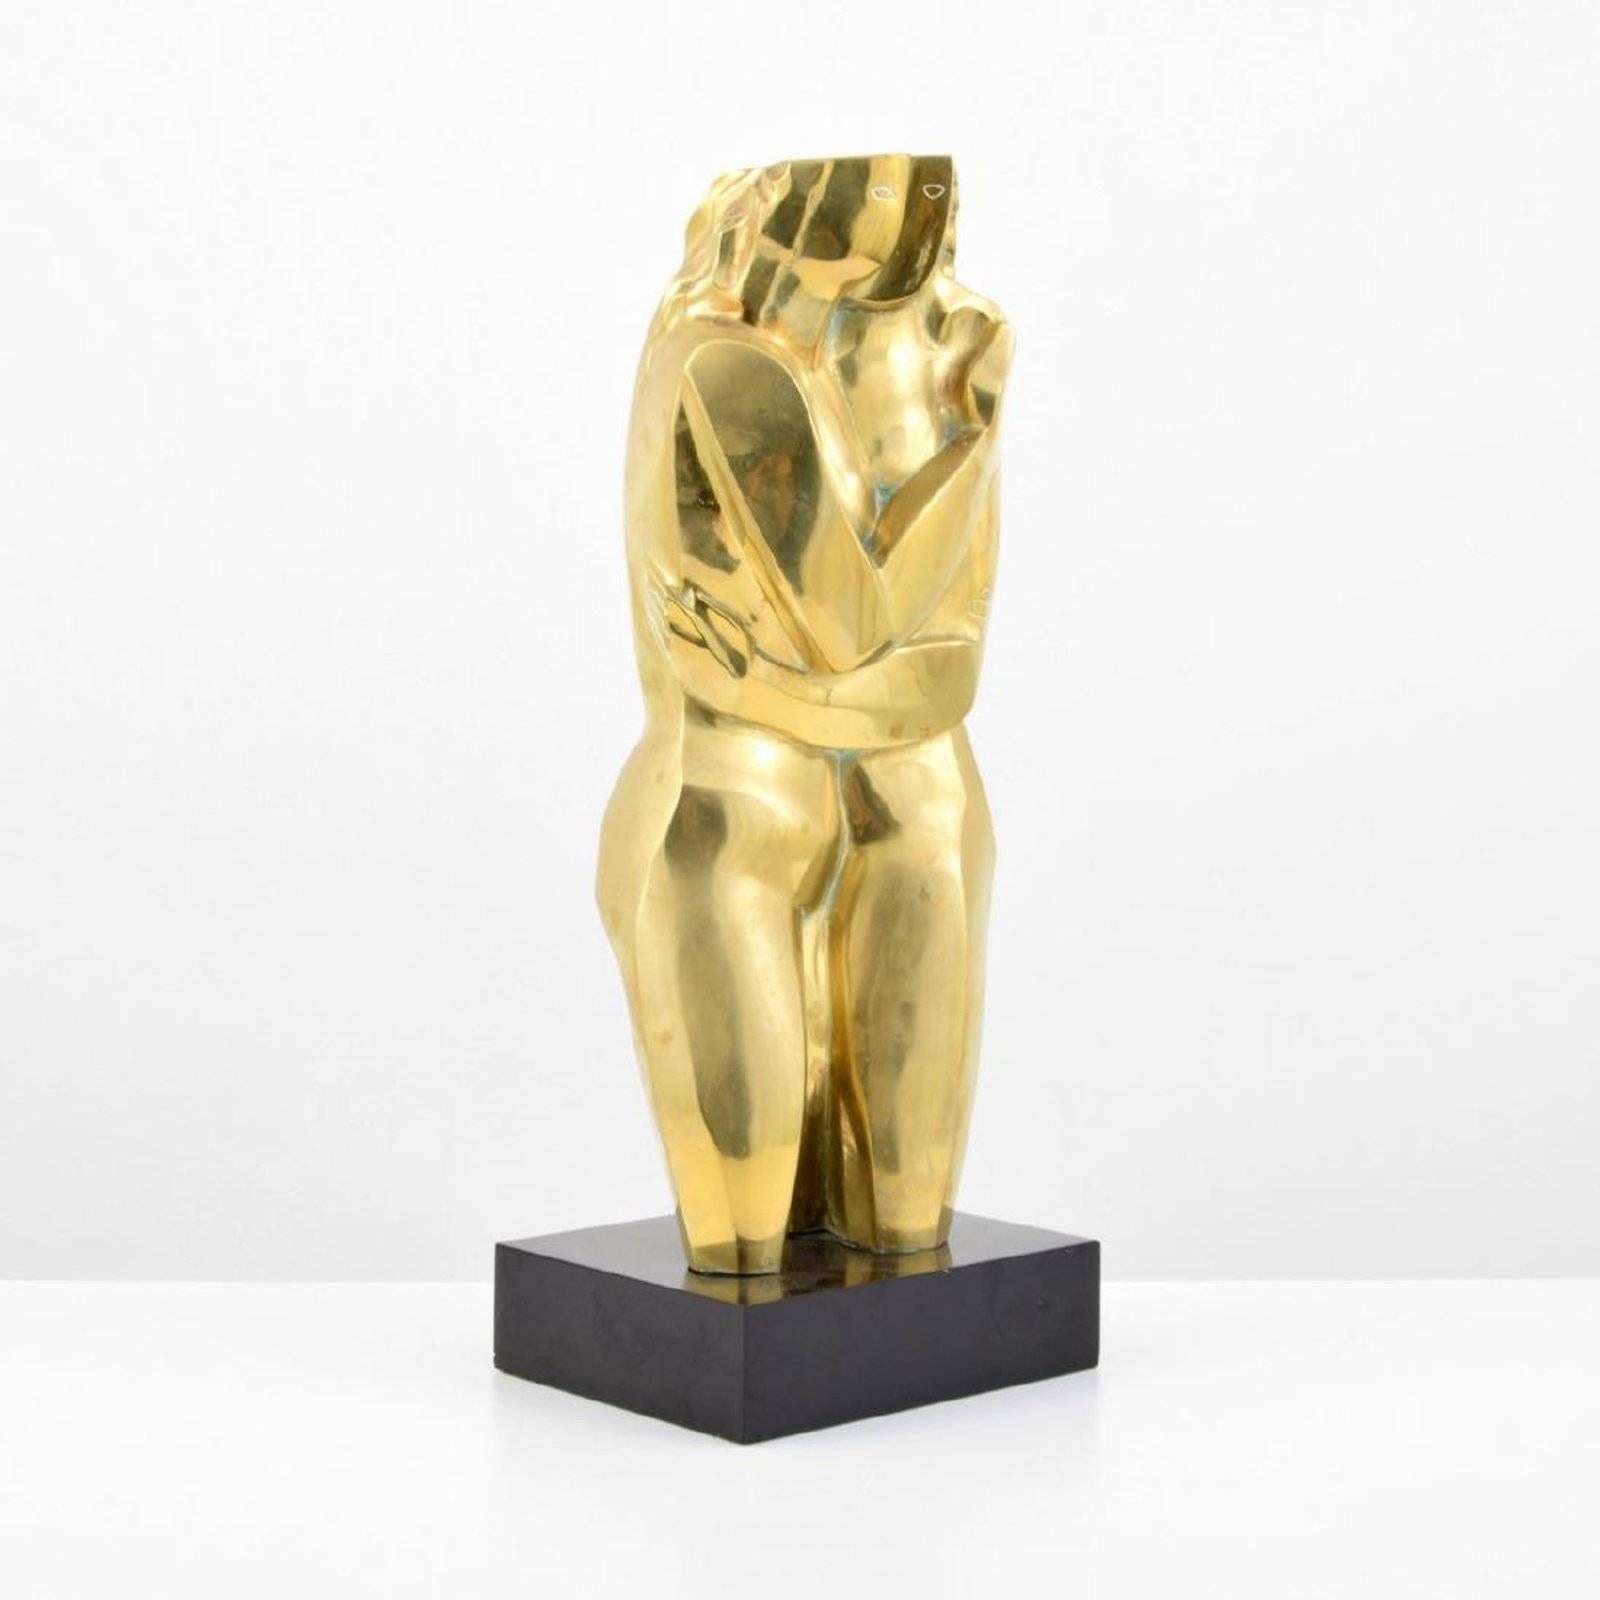 Large figural sculpture by Ossip Zadkine (1890-1967). Work is titled Intimite. Provenance (information obtained through an online search): Molenaar Collection (per previous auction listing) Adams Amsterdam Auctions, Amsterdam, Netherlands, 9.28.15